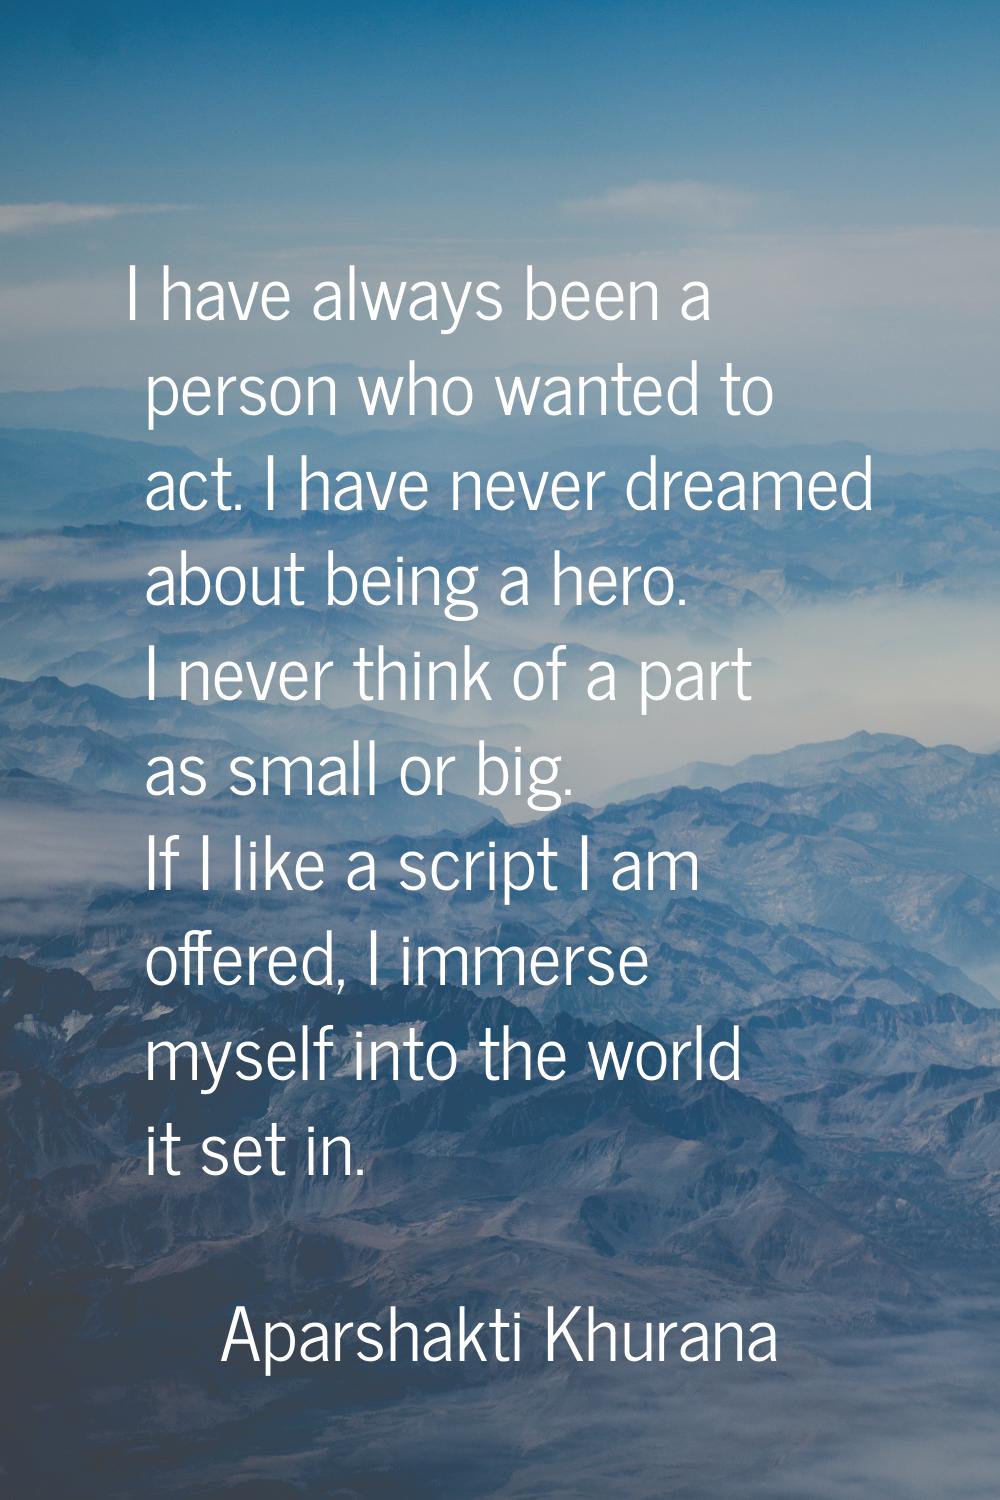 I have always been a person who wanted to act. I have never dreamed about being a hero. I never thi